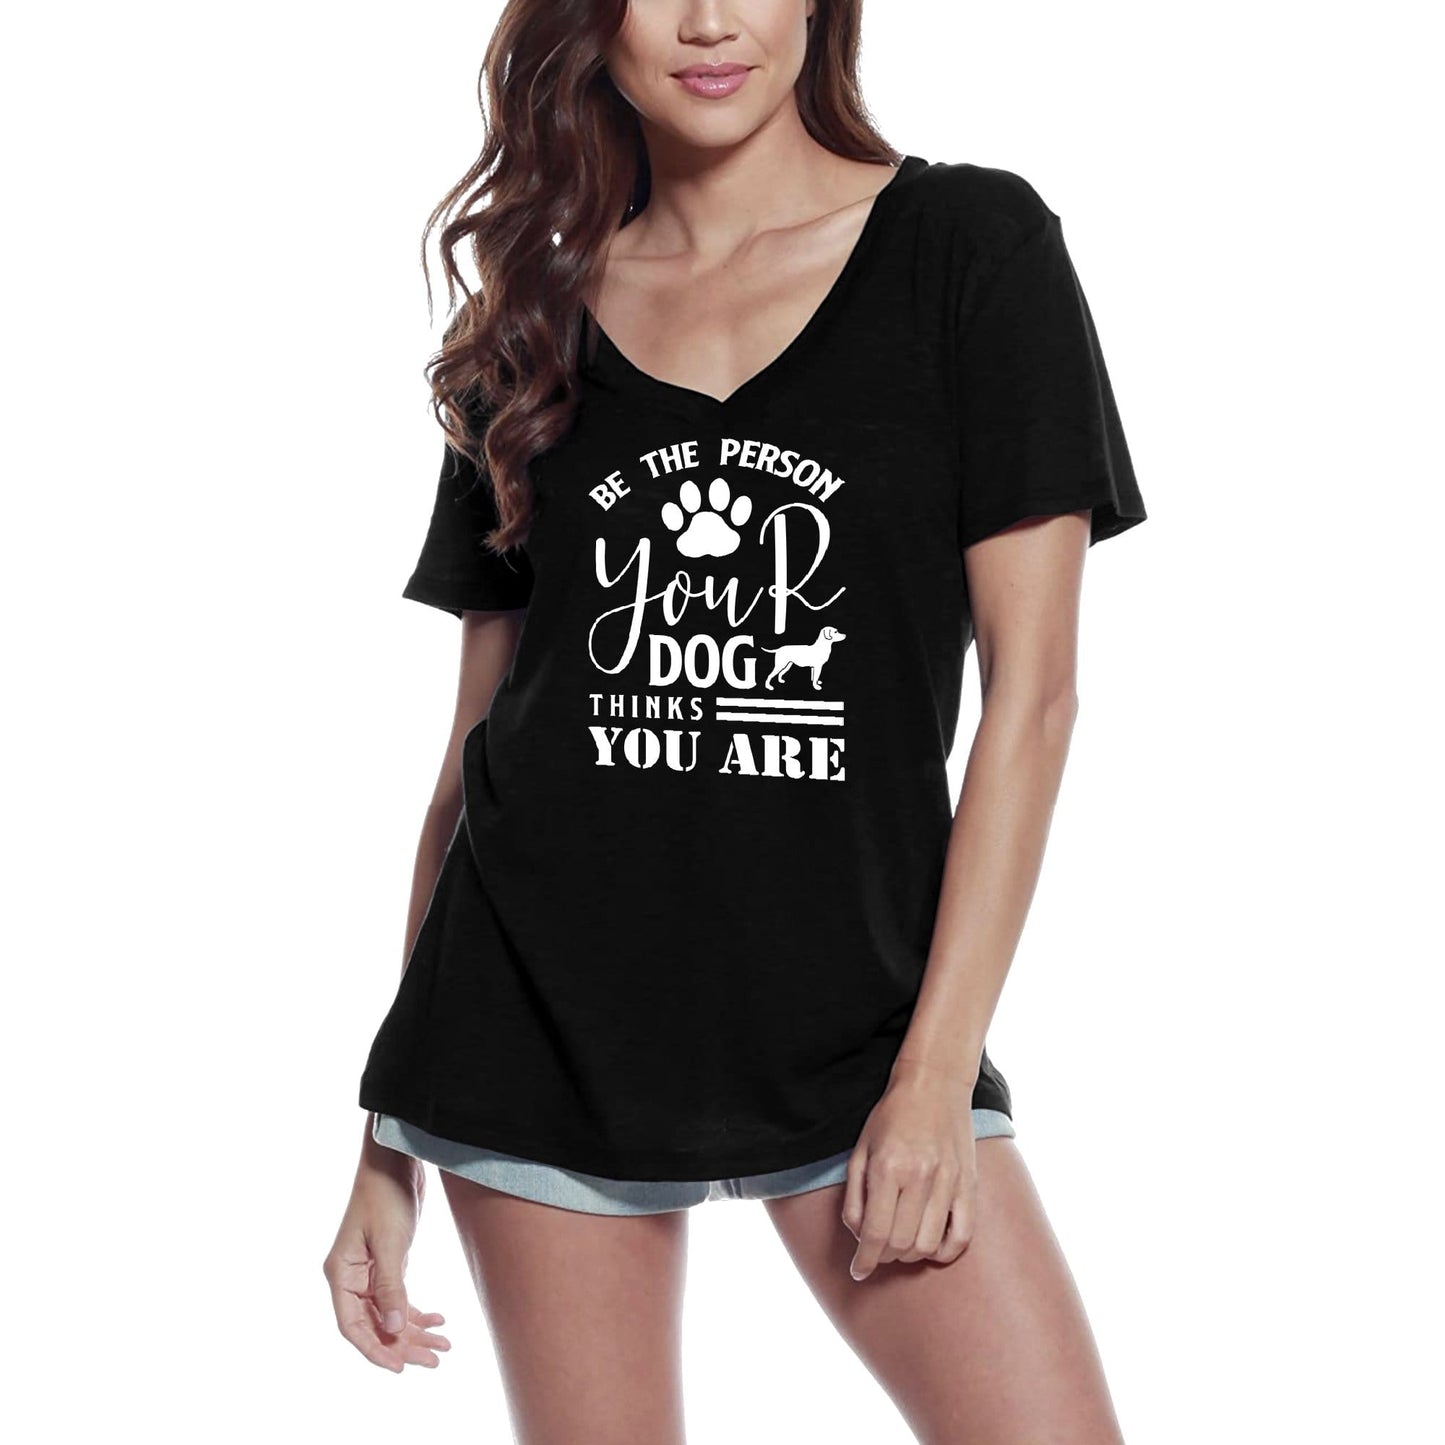 ULTRABASIC Women's T-Shirt Be the Person Your Dog Thinks You Are - Short Sleeve Tee Shirt Tops